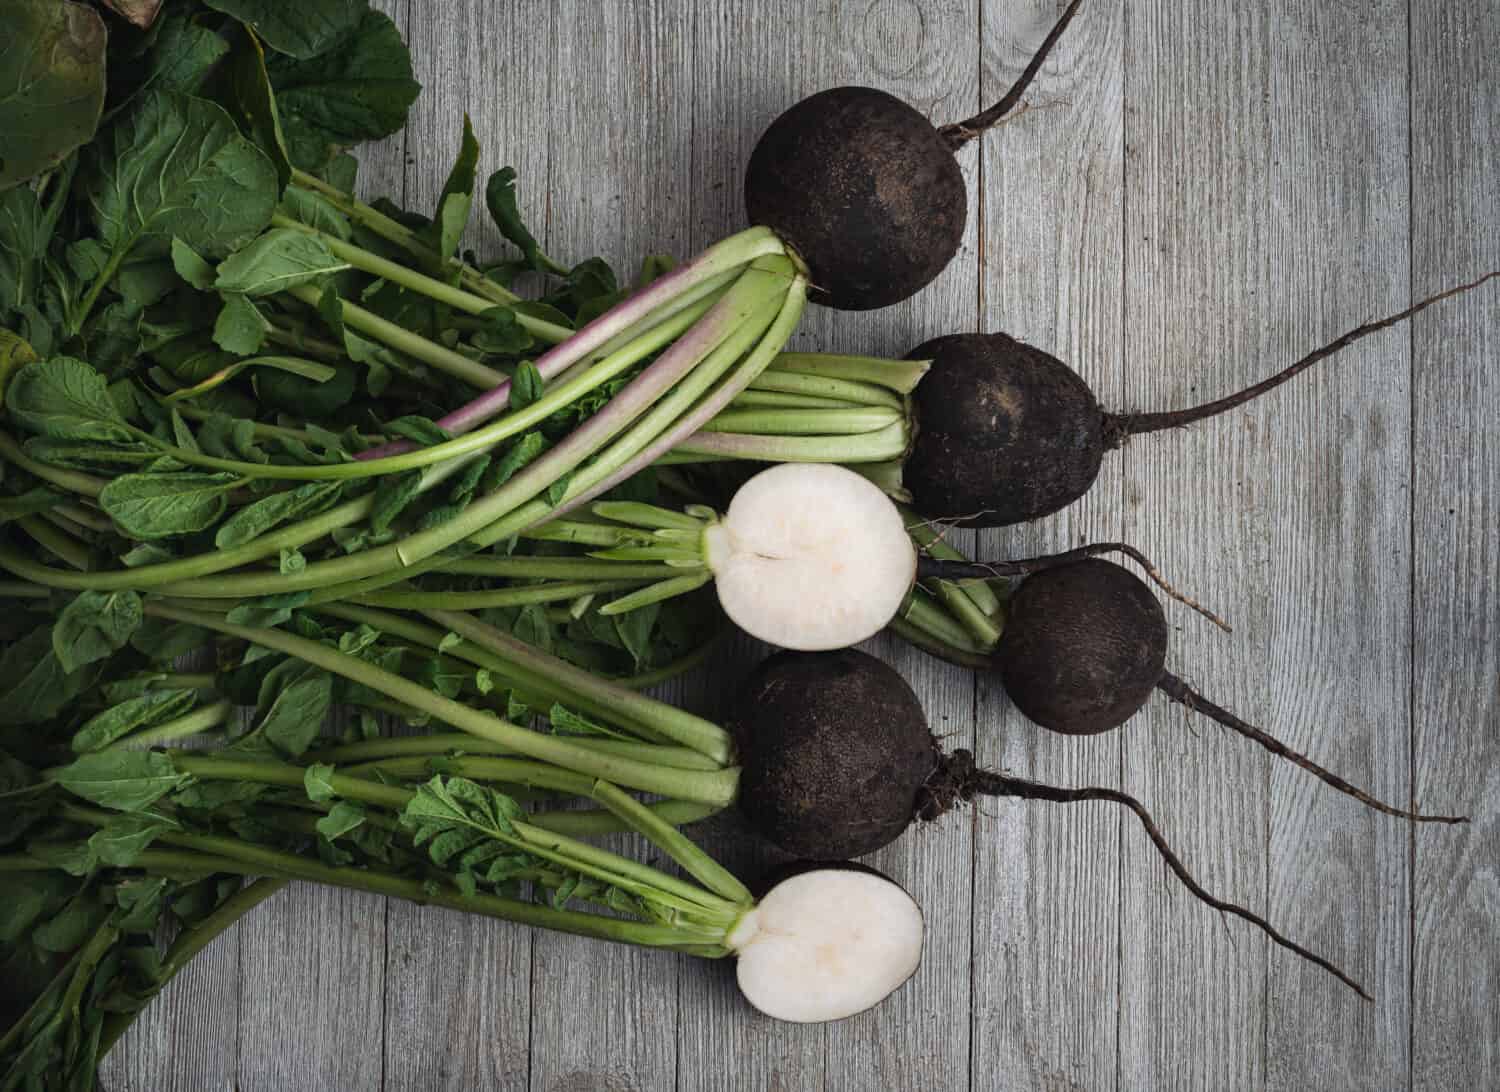 Bunch of black radish on a wooden table.